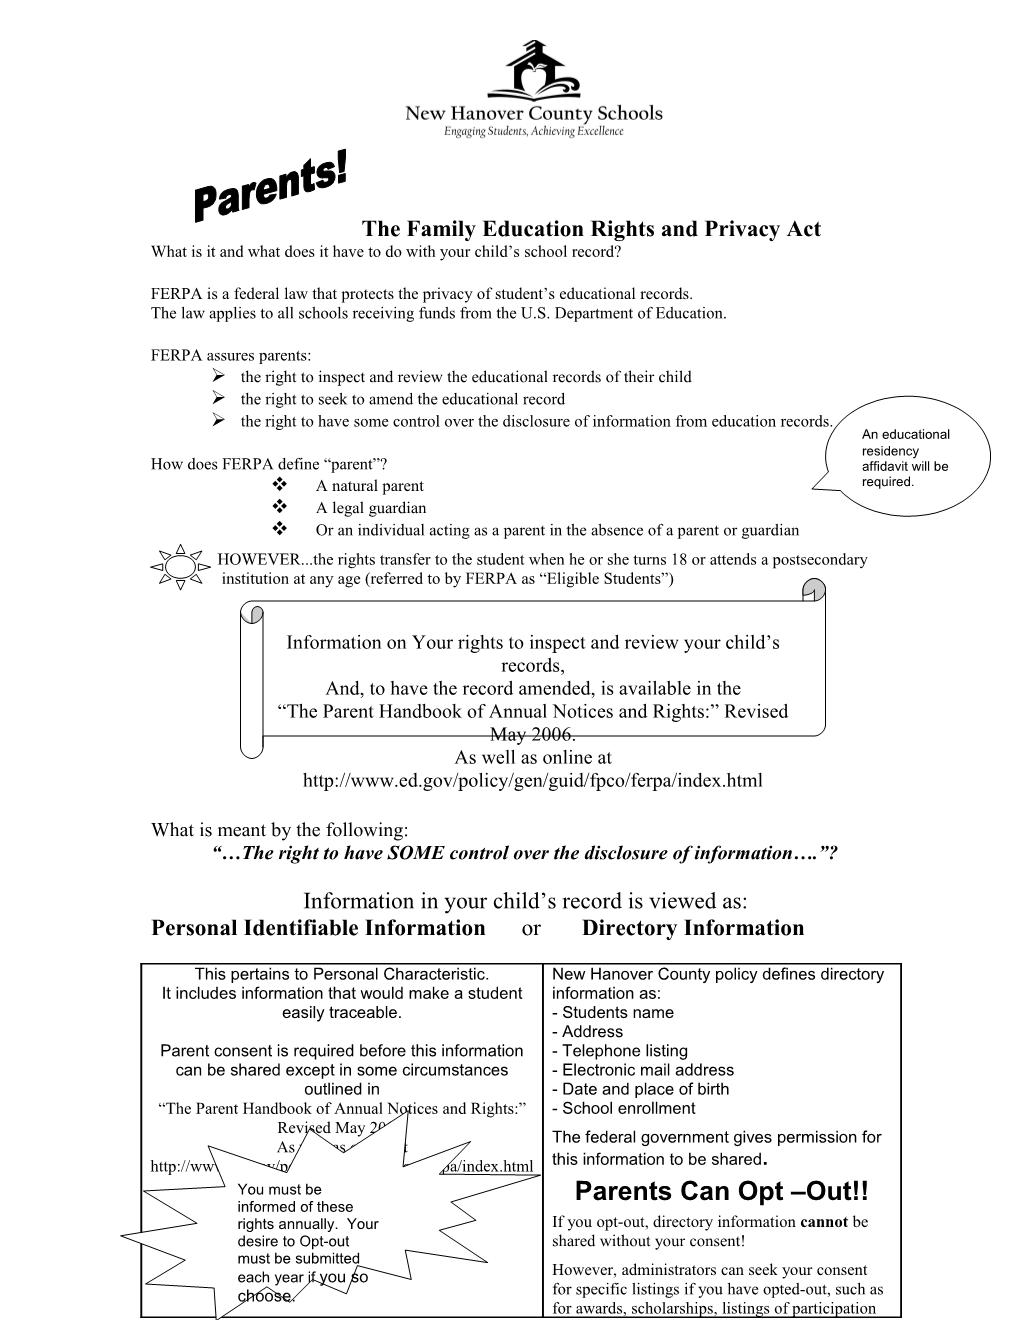 The Family Education Rights and Privacy Act